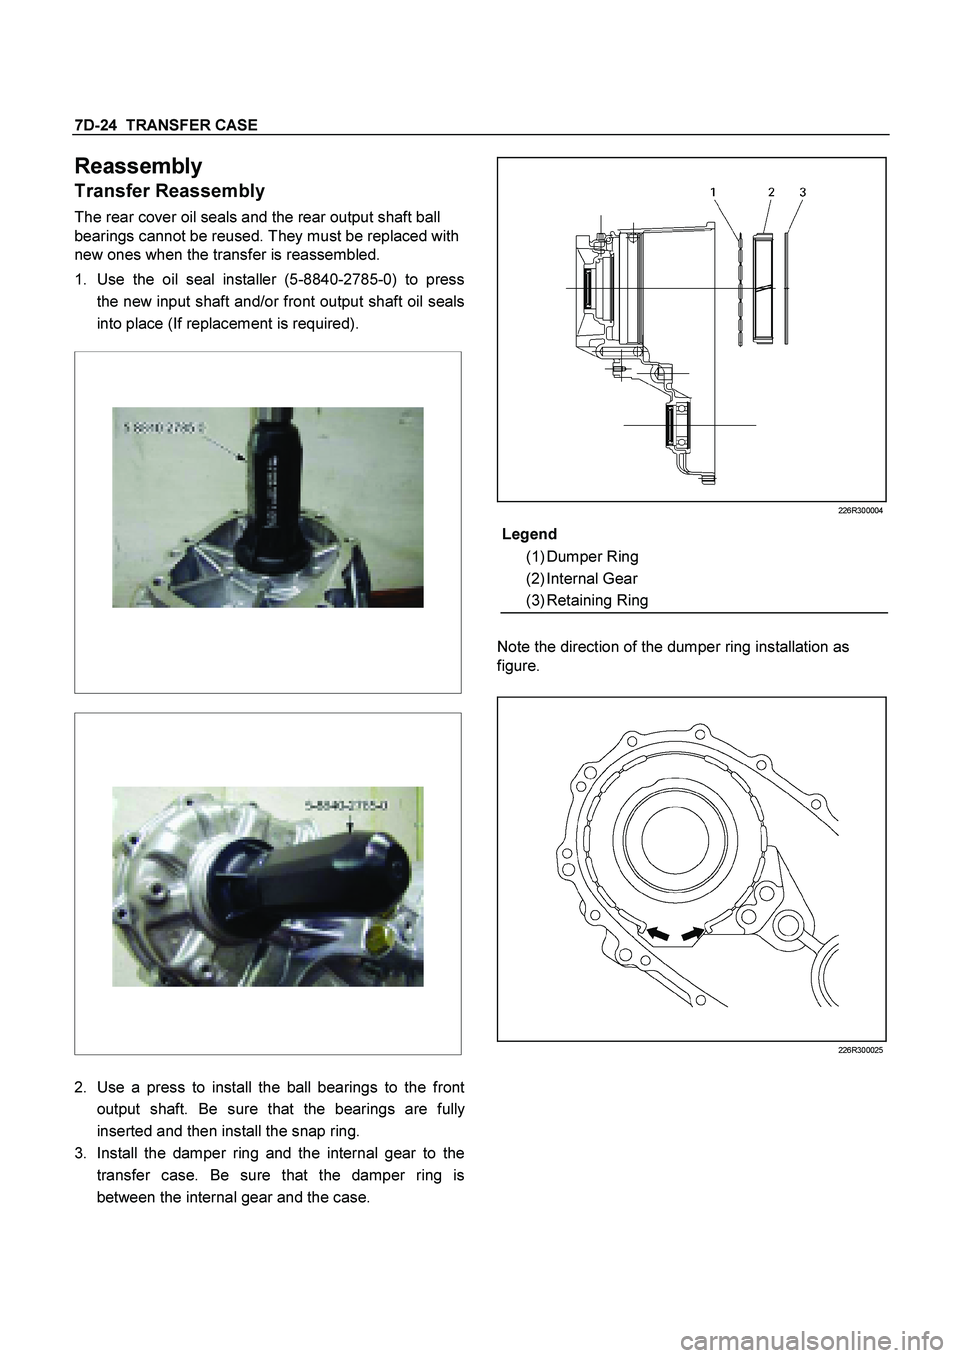 ISUZU TF SERIES 2004  Workshop Manual 7D-24  TRANSFER CASE
 
Reassembly 
Transfer Reassembly 
The rear cover oil seals and the rear output shaft ball 
bearings cannot be reused. They must be replaced with 
new ones when the transfer is re